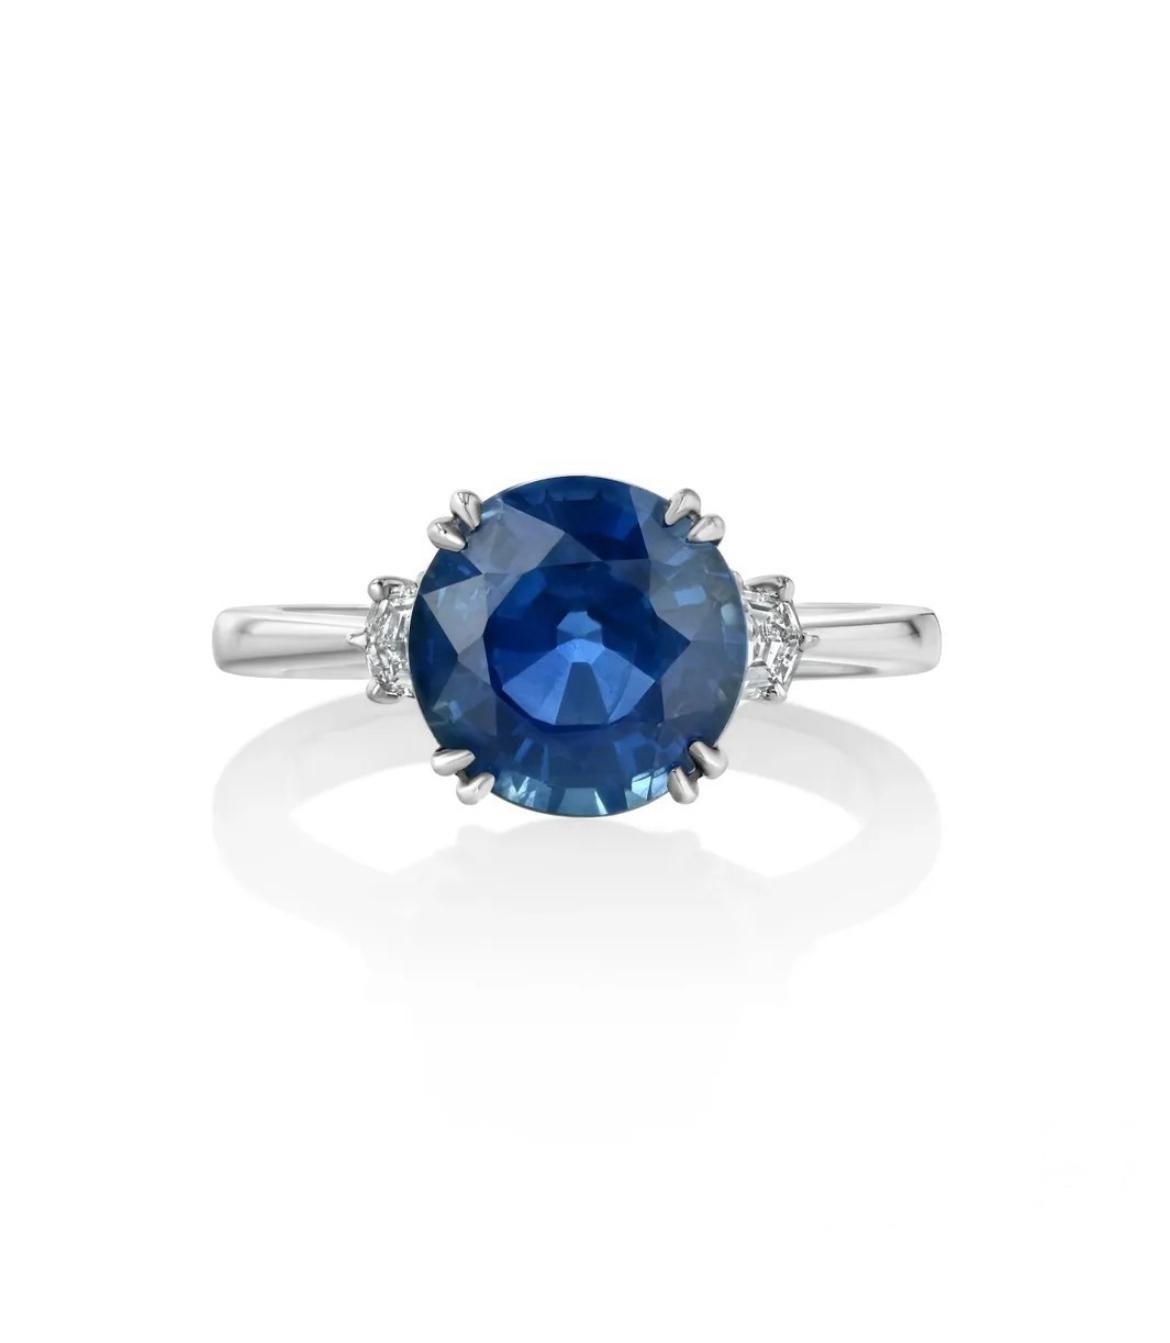 Platinum ring, featuring a 3.85-carat, GIA certified blue sapphire, flanked by two cadillac-cut diamonds. 